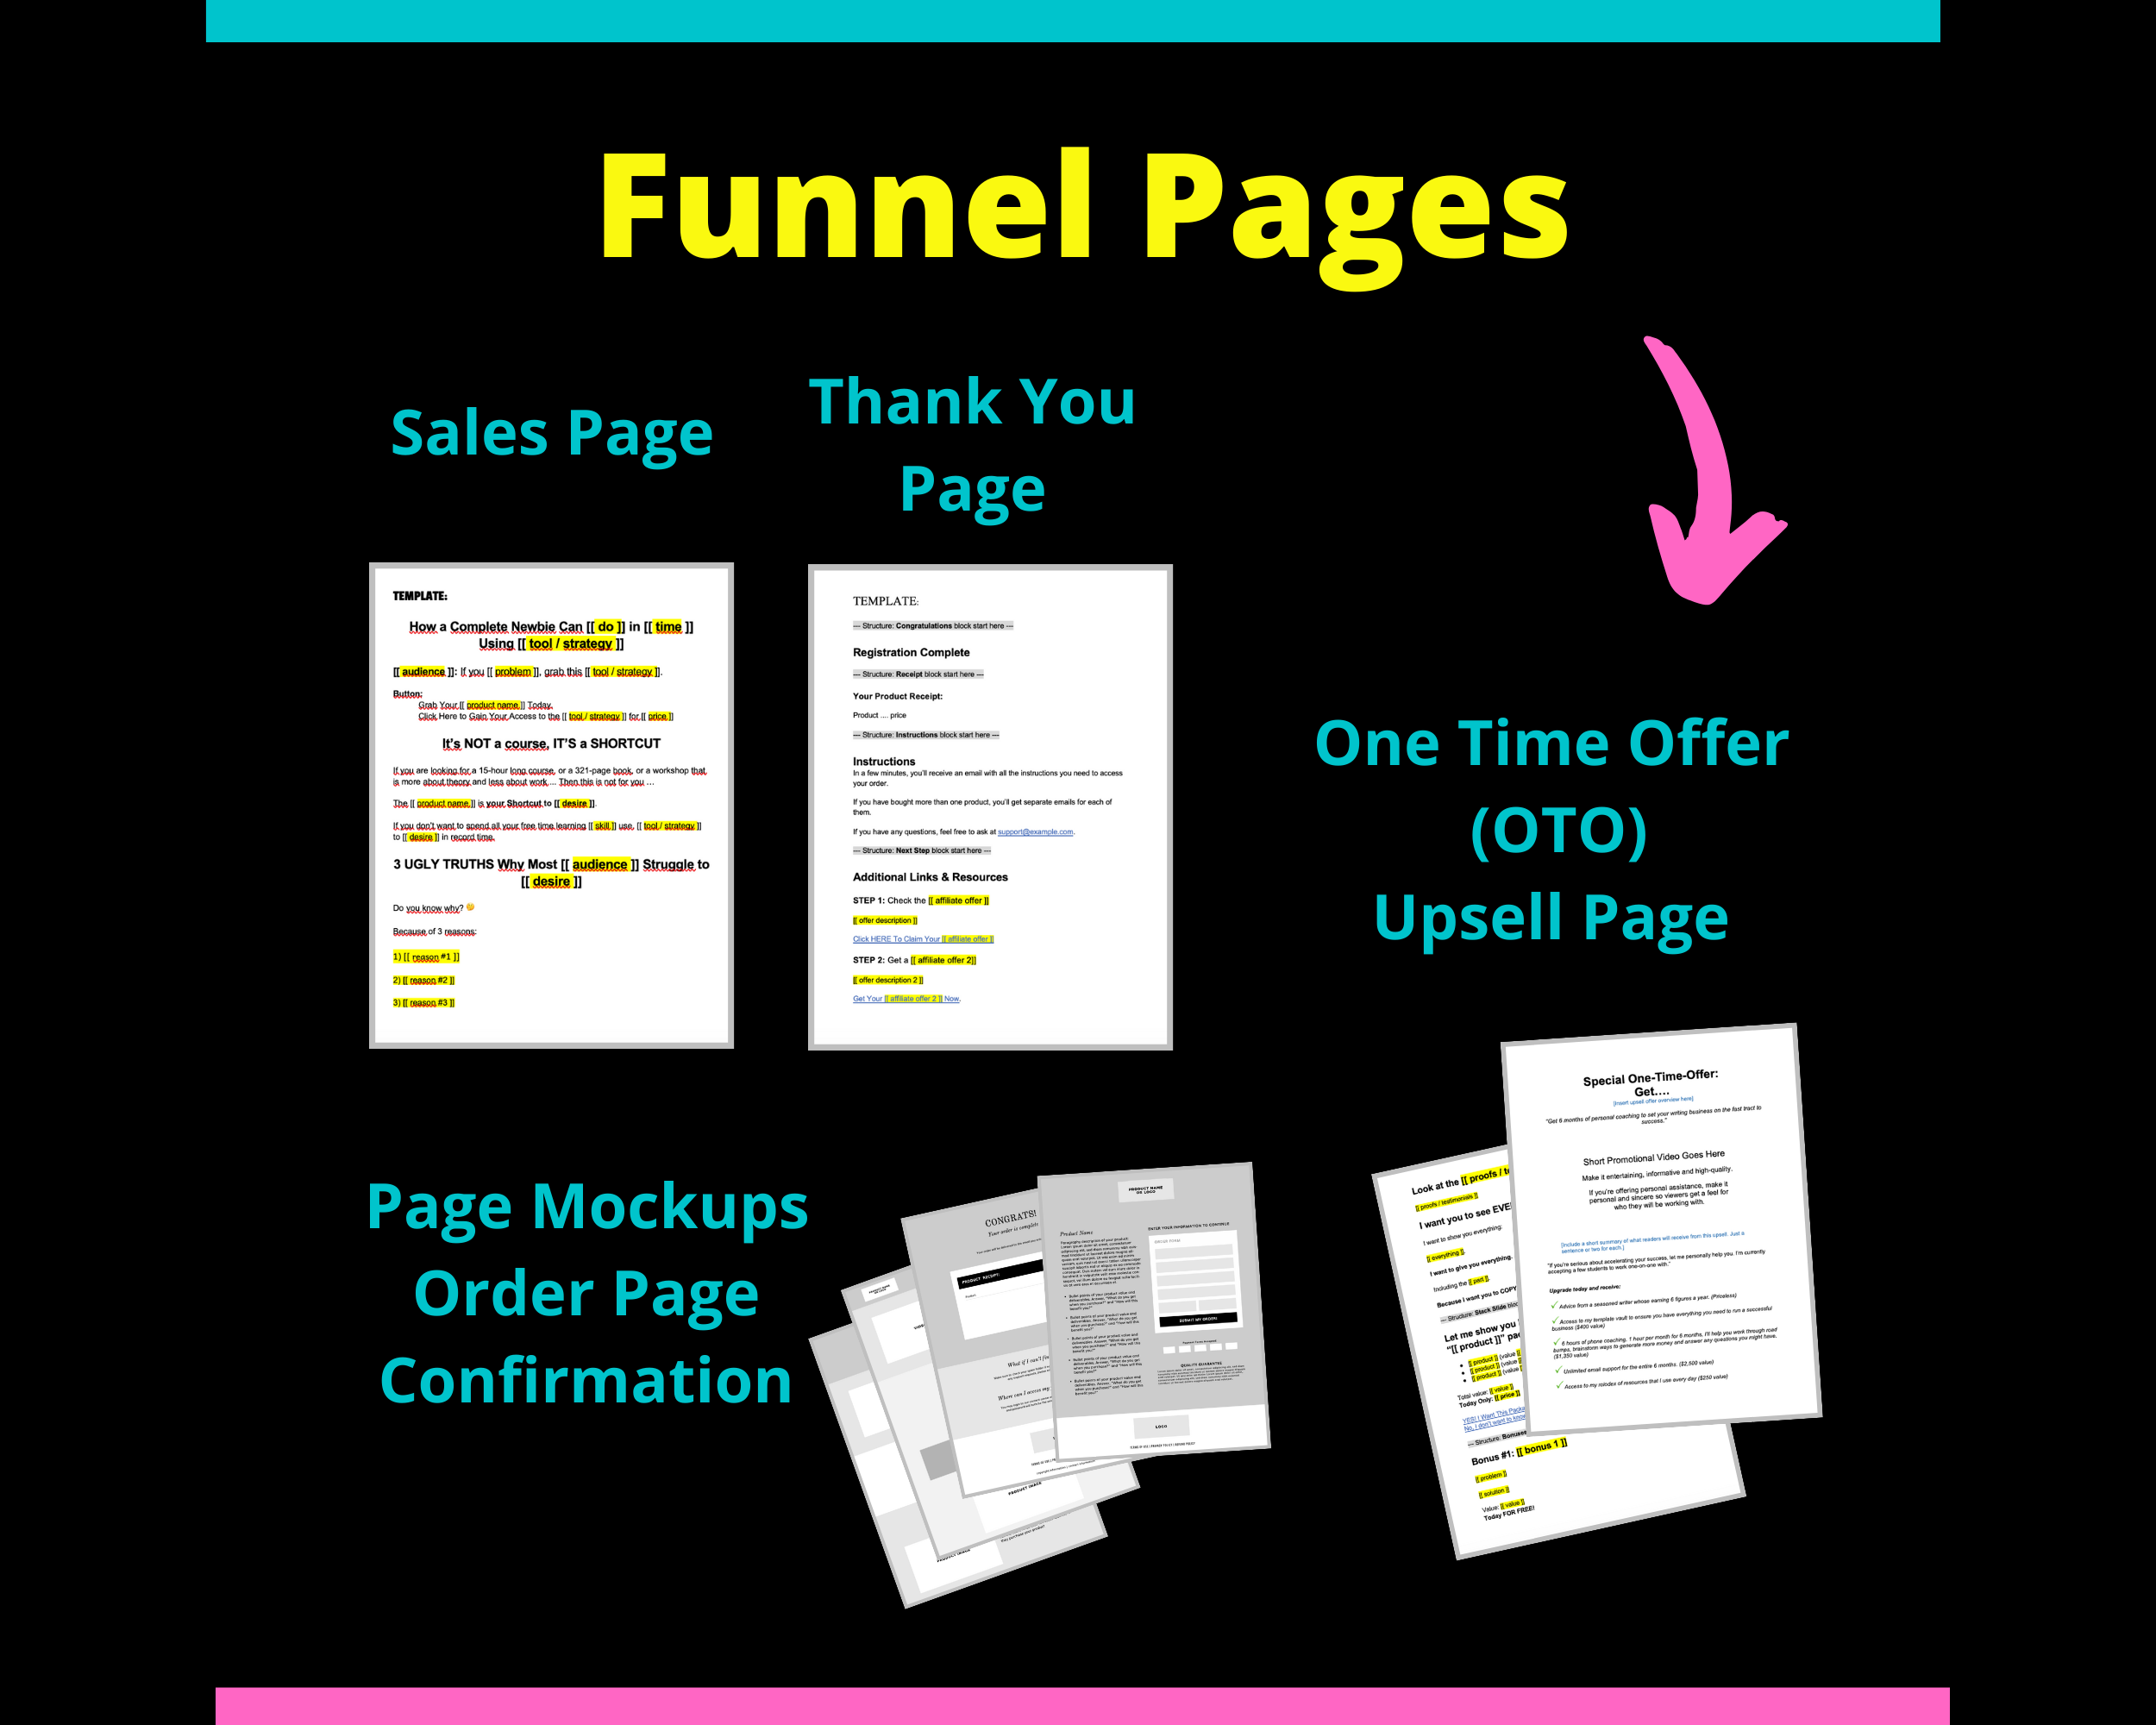 Sales Page in a Box | Landing Page Template | Sales Page Template | Lead Capture Page